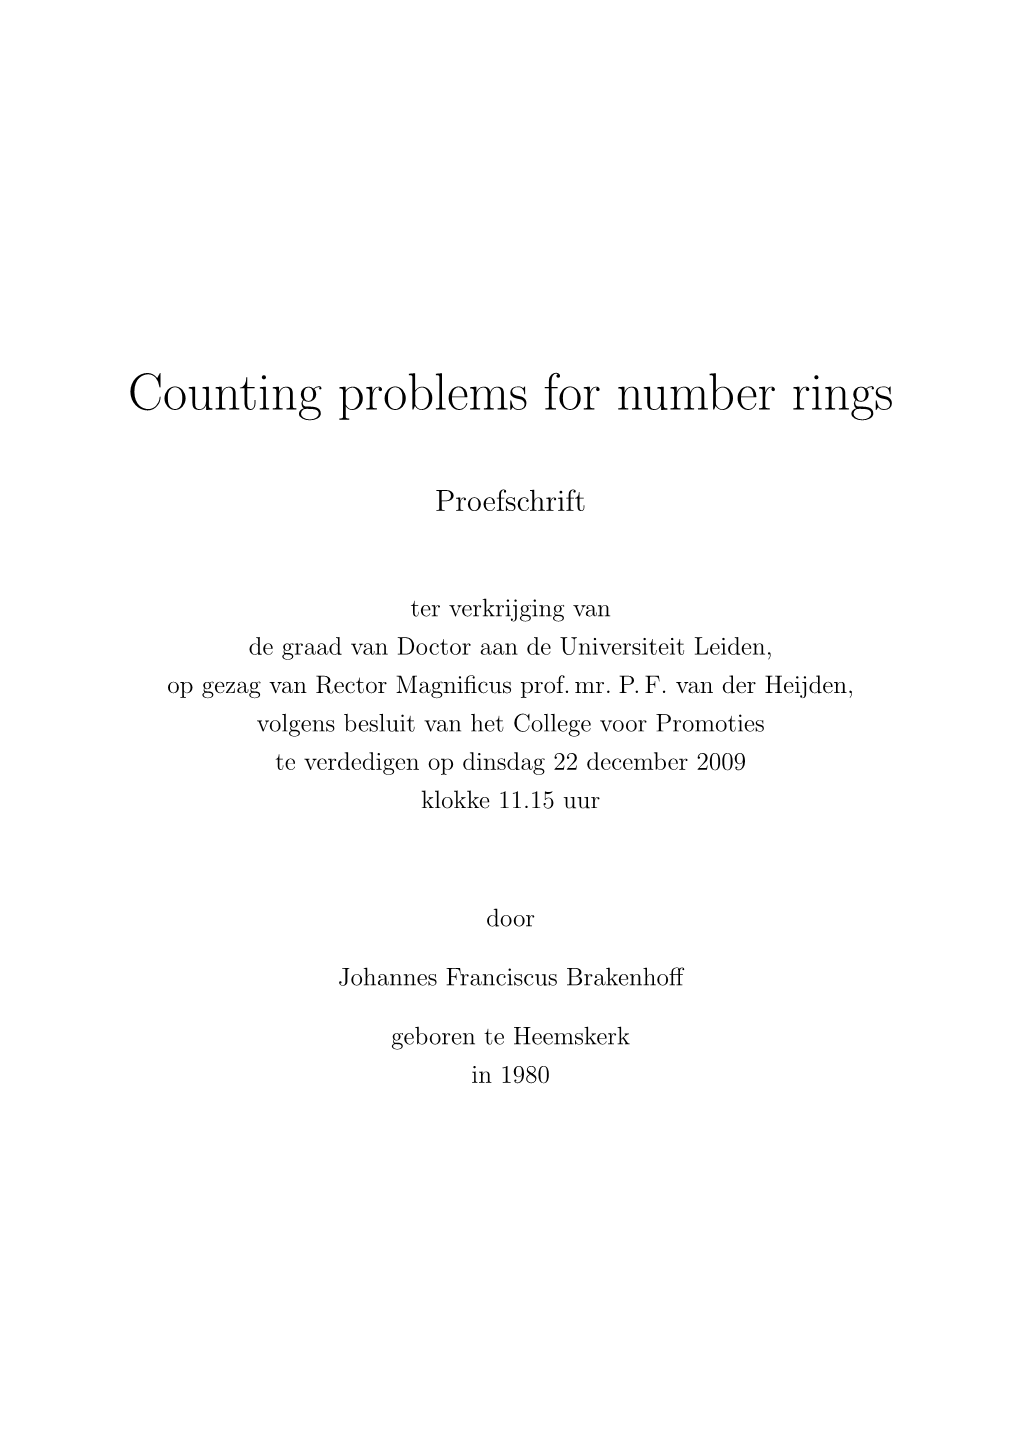 Counting Problems for Number Rings